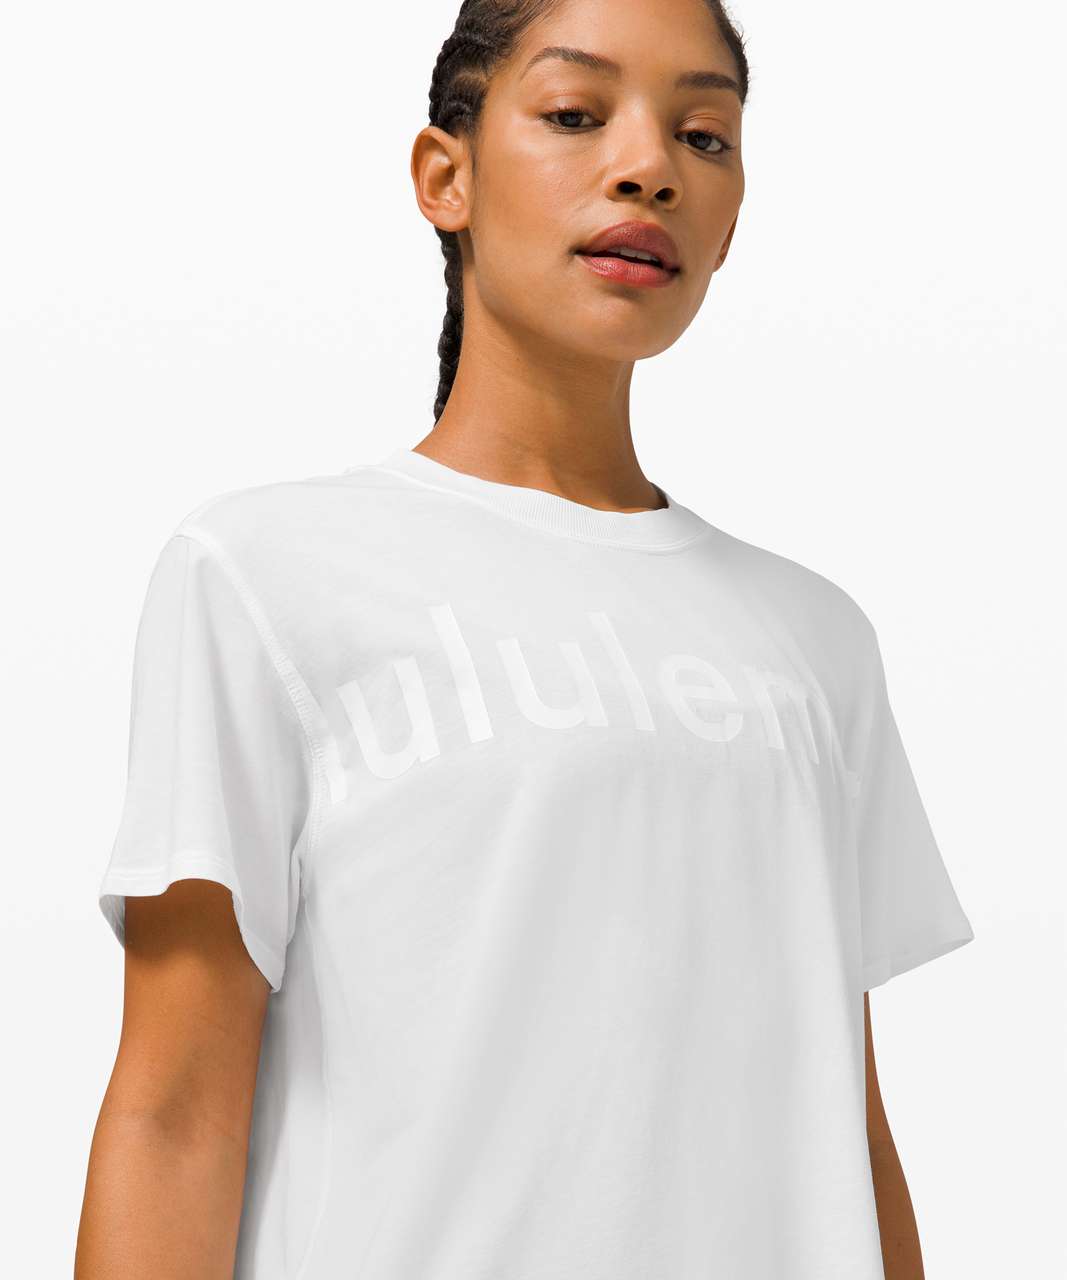 Lululemon All Yours Tee *Graphic - White